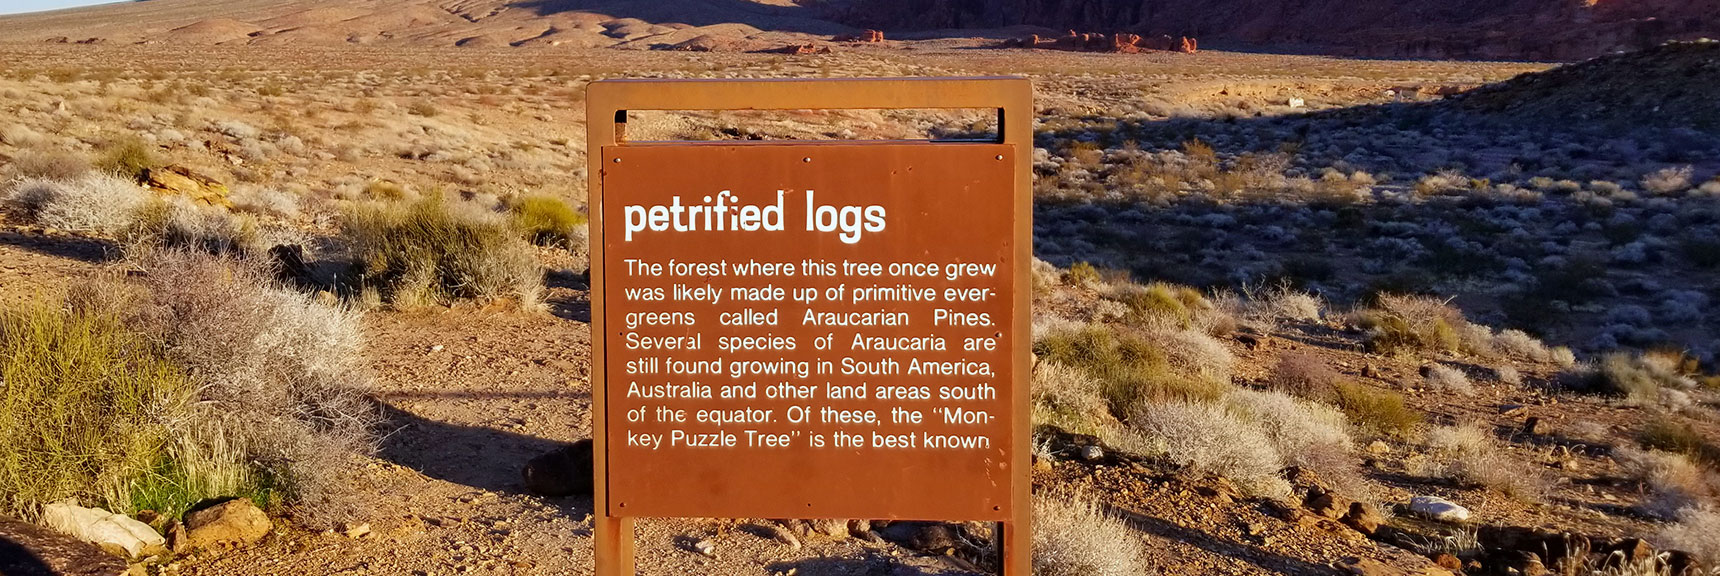 Interpretive Sign Along Petrified Logs Loop in Valley of Fire State Park, Nevada